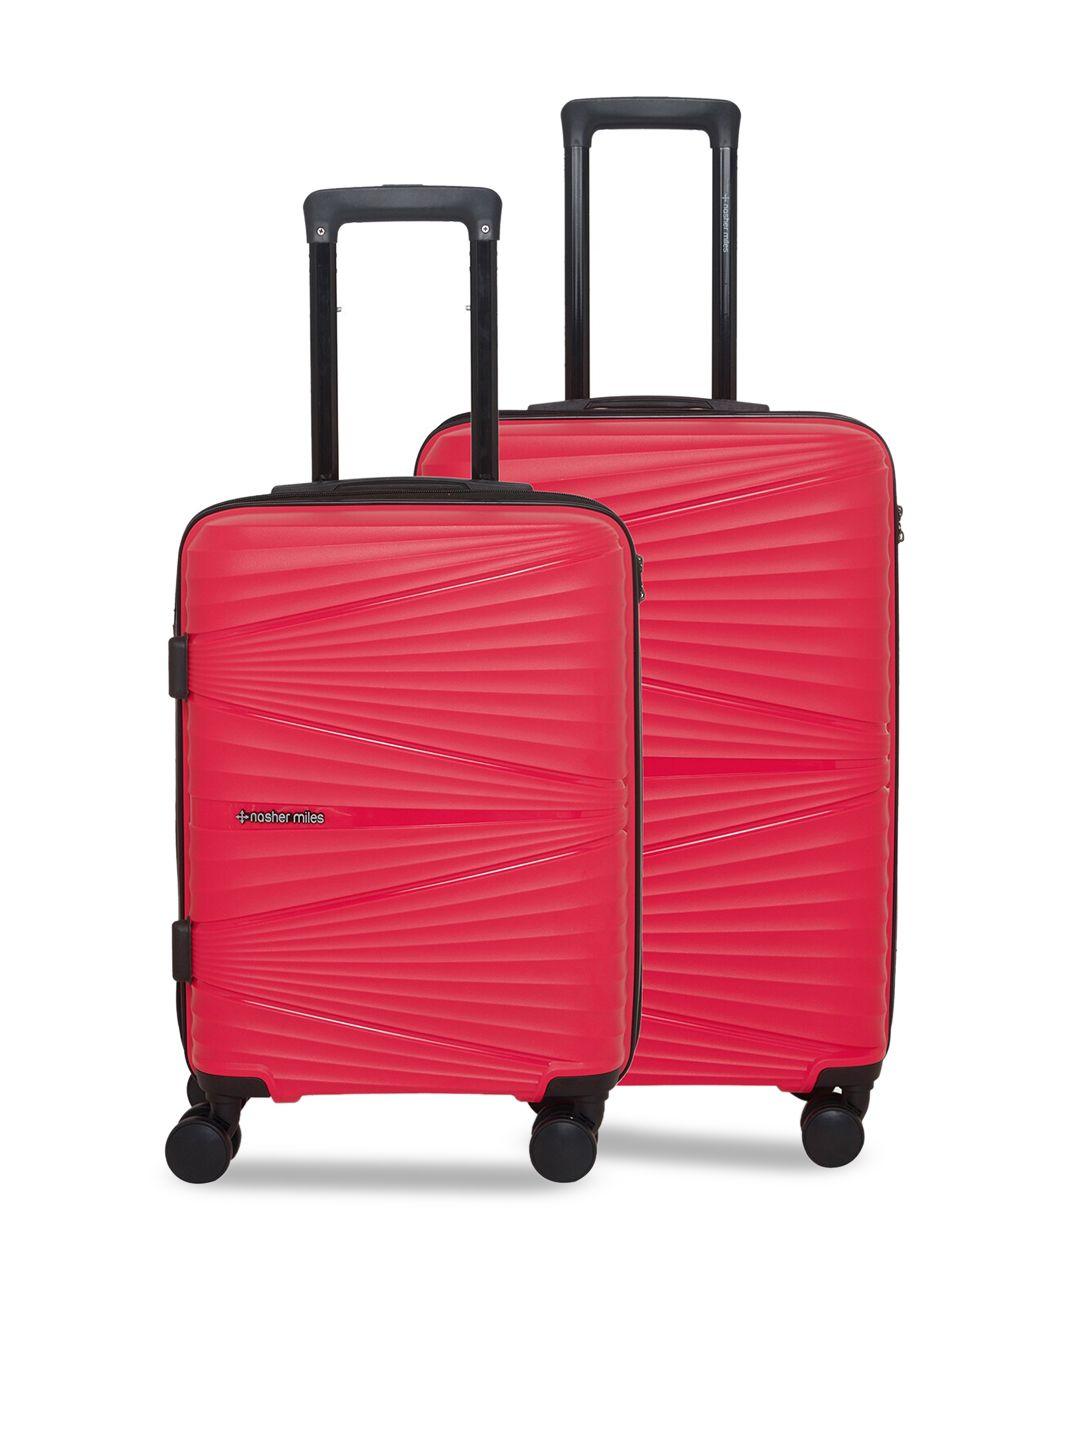 nasher miles set of 2 red textured hard sided trolley bags